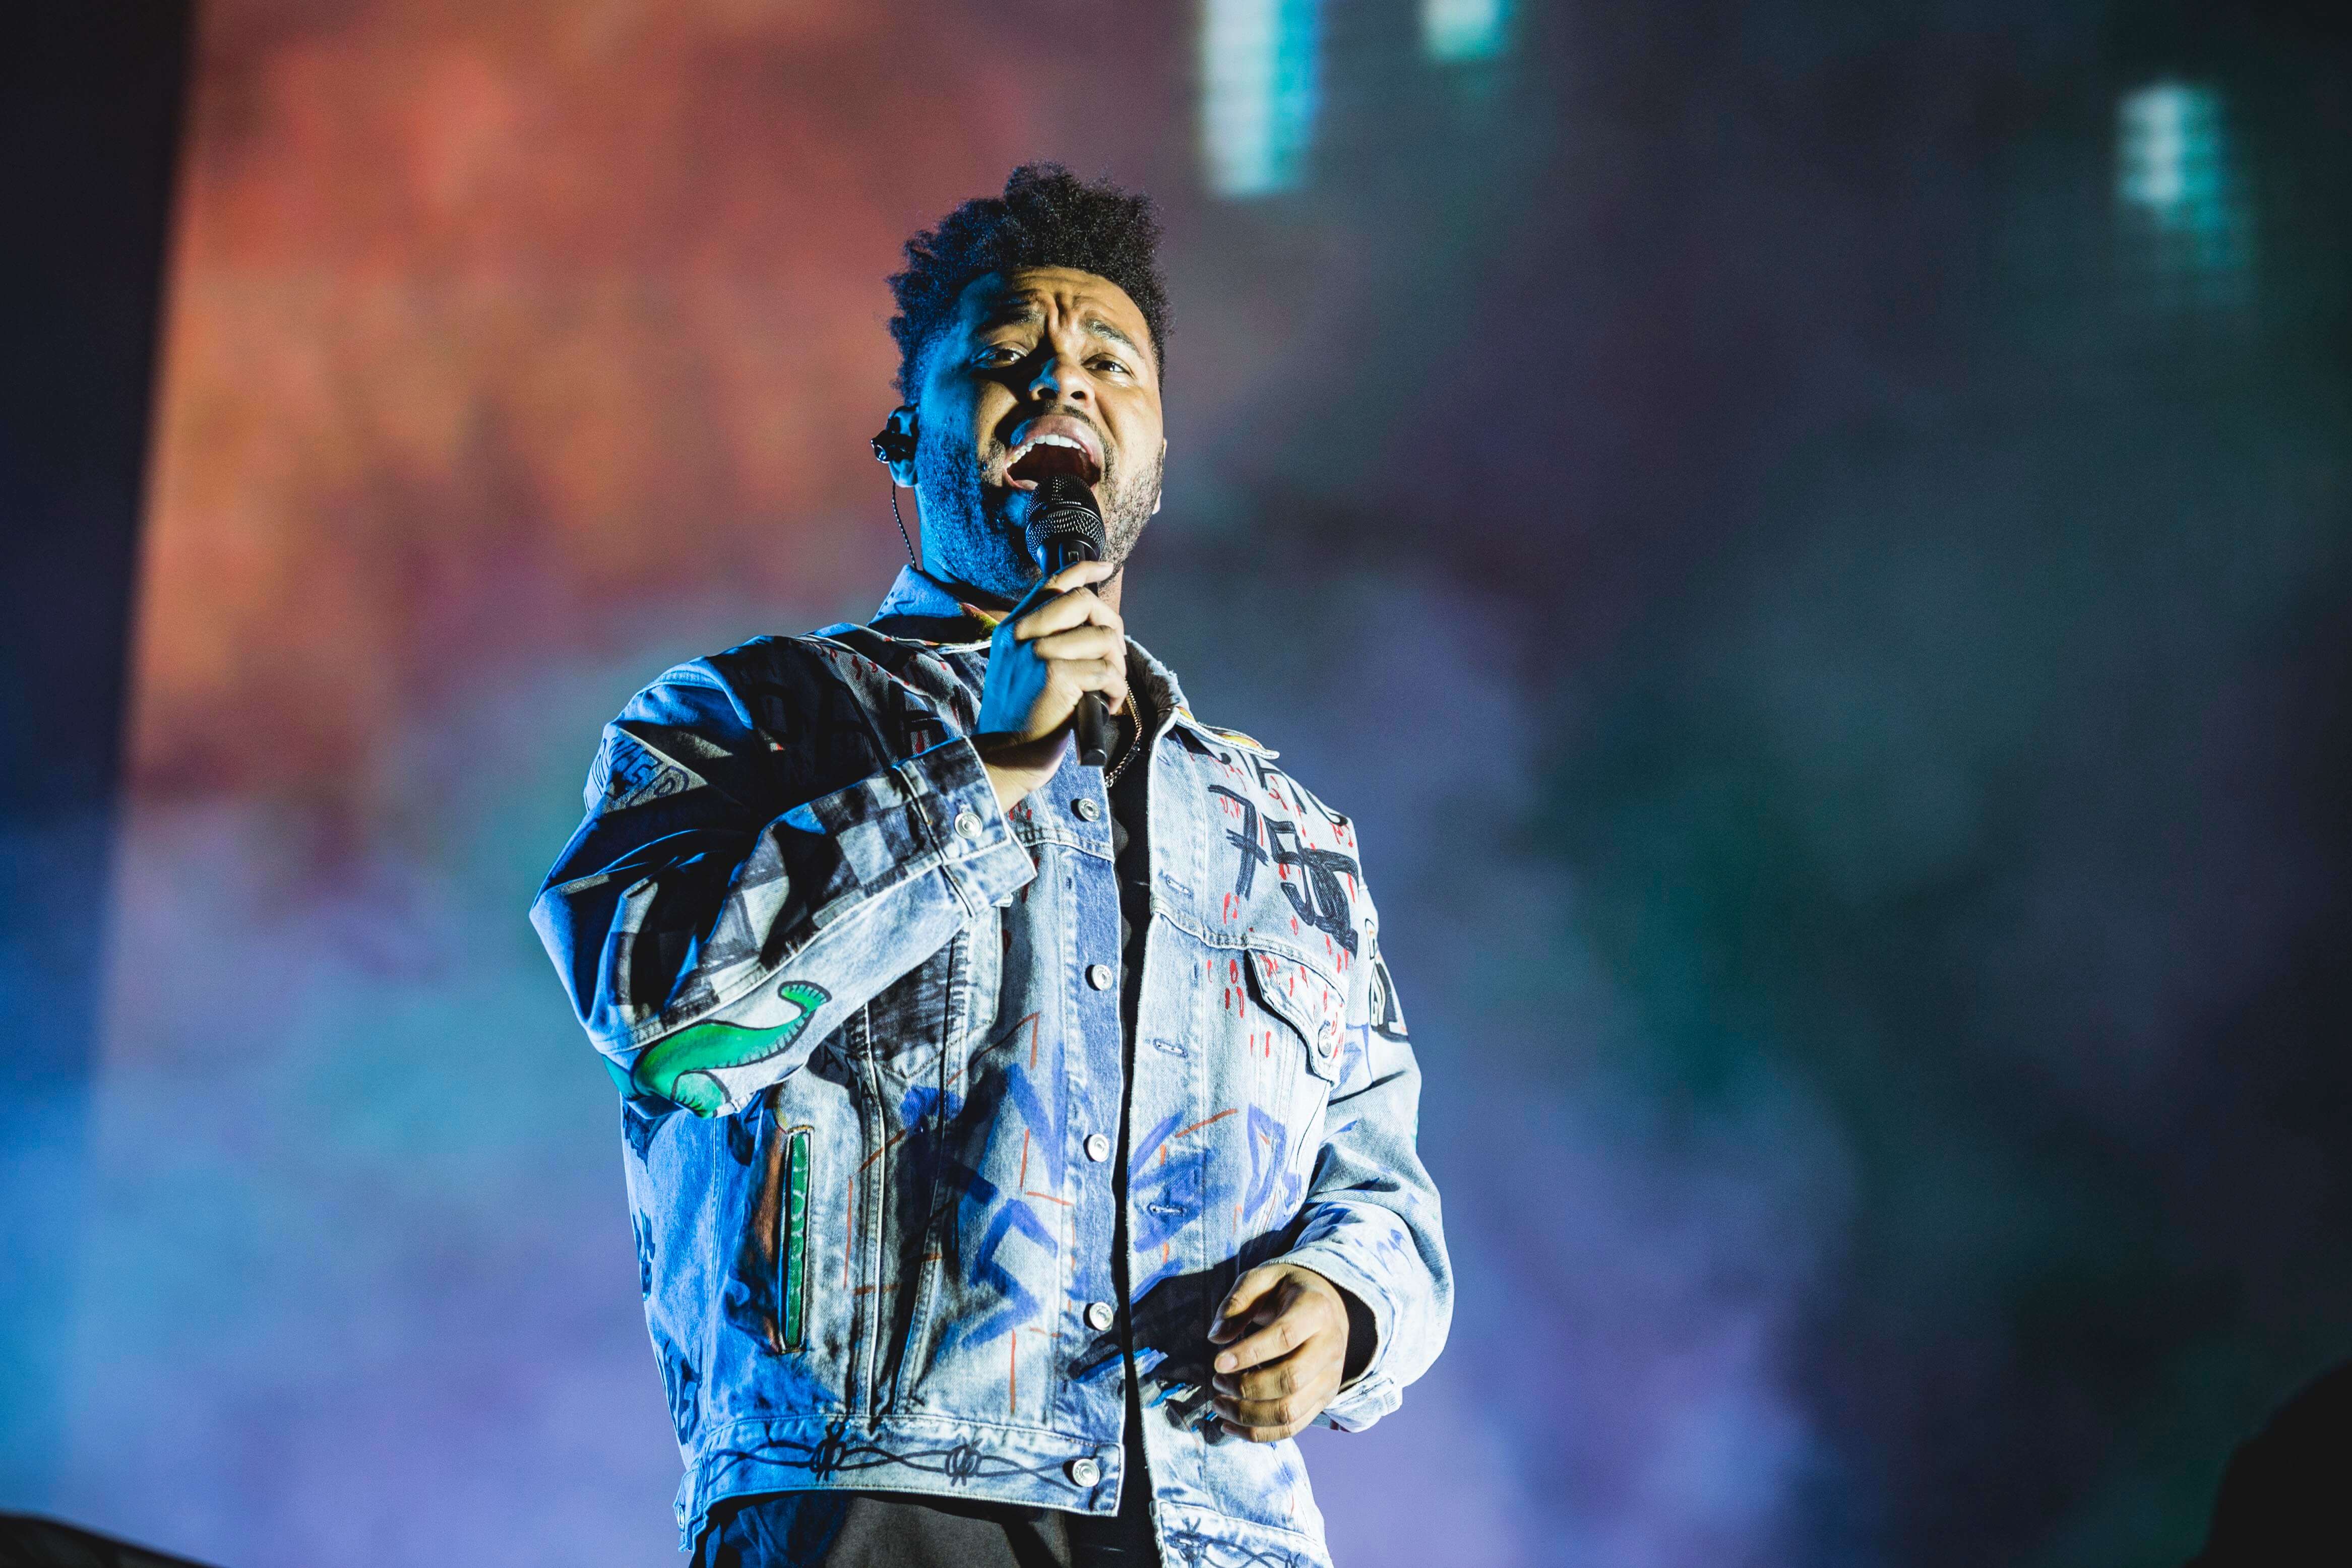 Canadian singer Abel Makkonen Tesfaye aka The Weeknd performs live on stage during the first day of the Lollapalooza Berlin music festival at Olympiagelände on September 8, 2018 in Berlin, Germany.